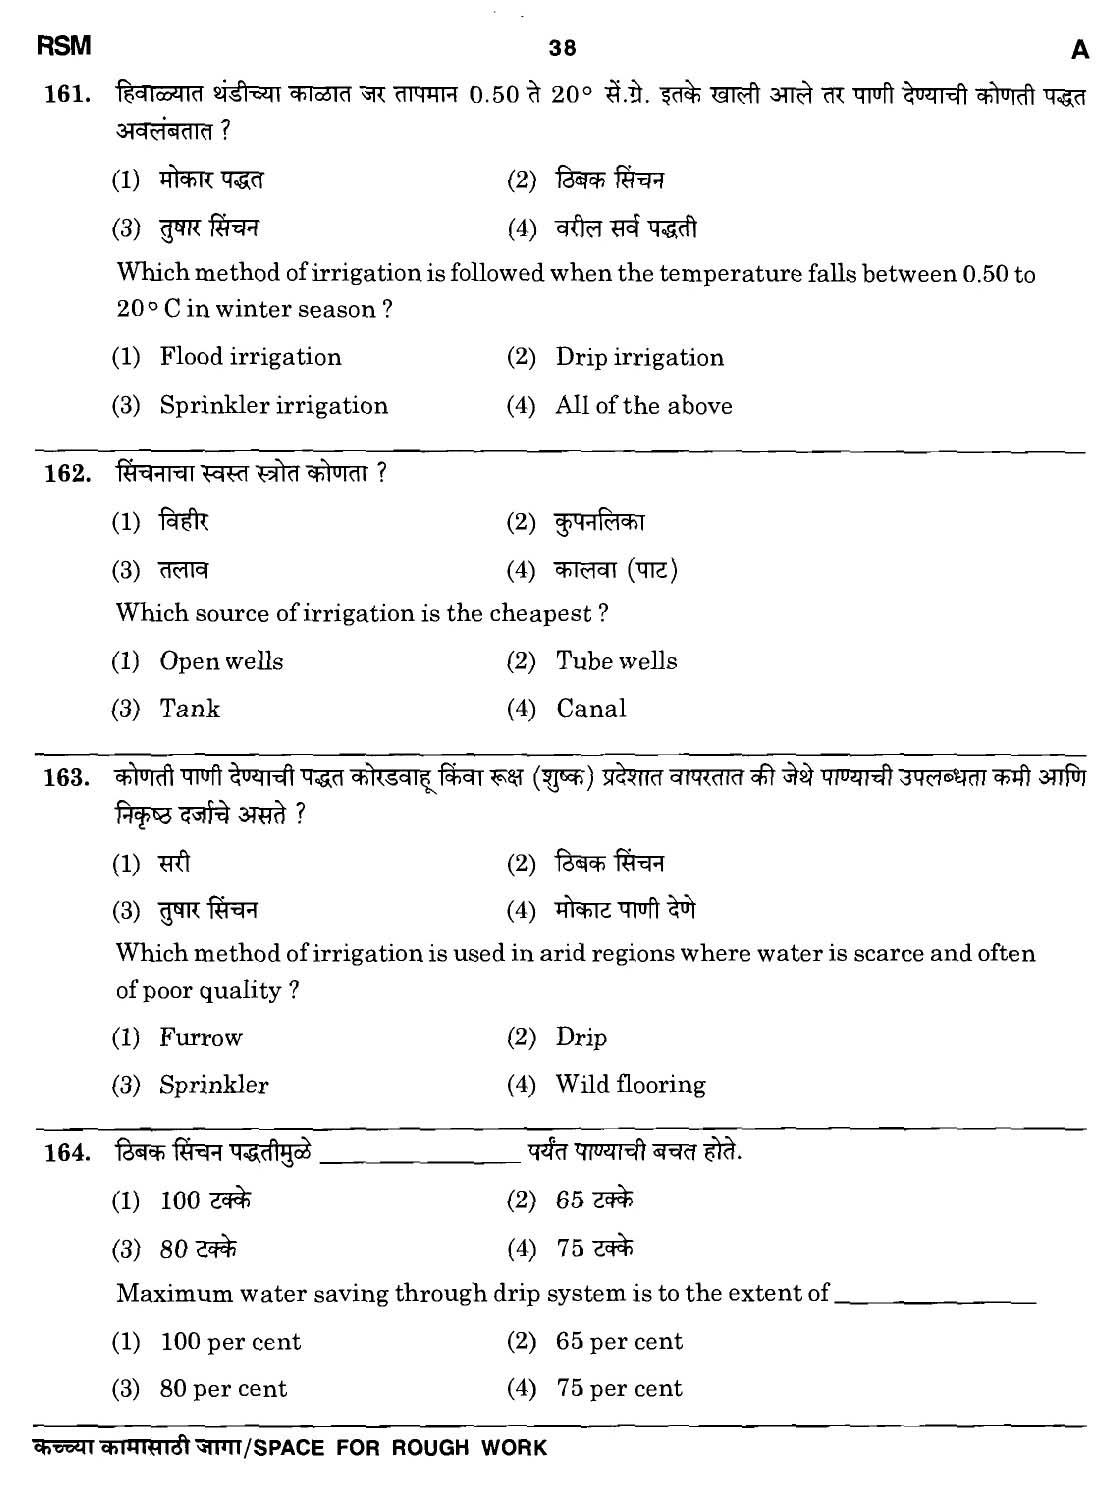 MPSC Agricultural Services Preliminary Exam 2011 Question Paper 37